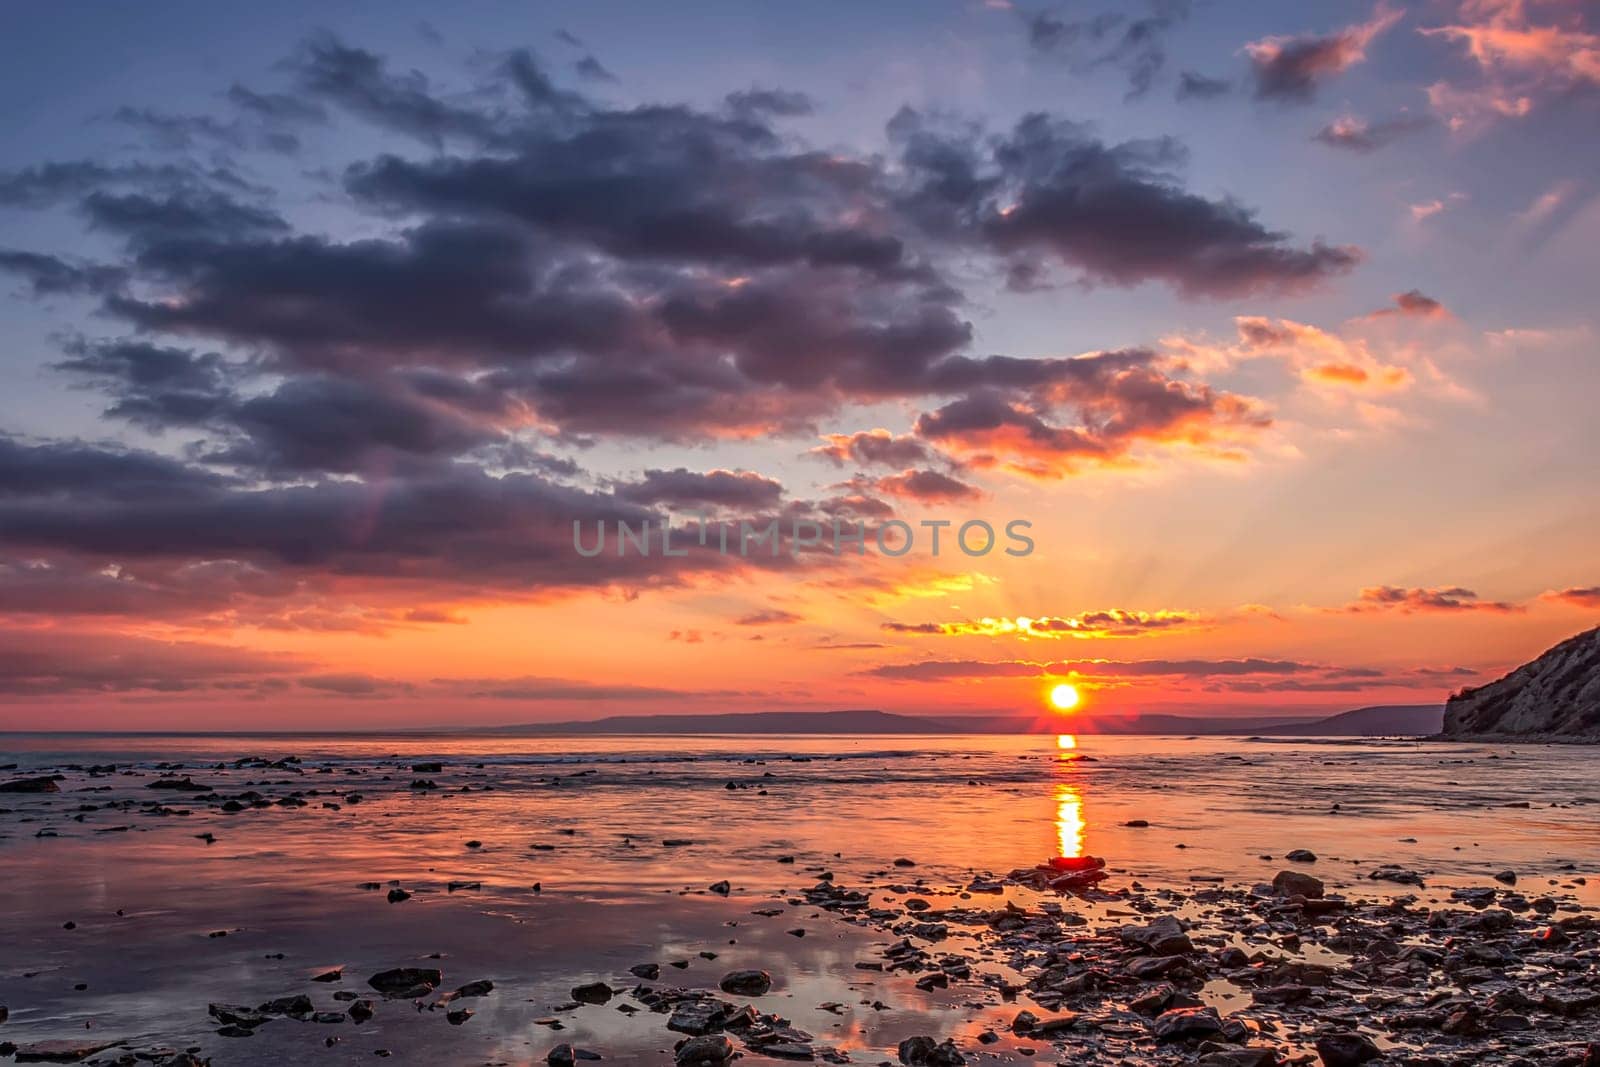 Exciting sunset view at the Black sea rocky coast, by EdVal